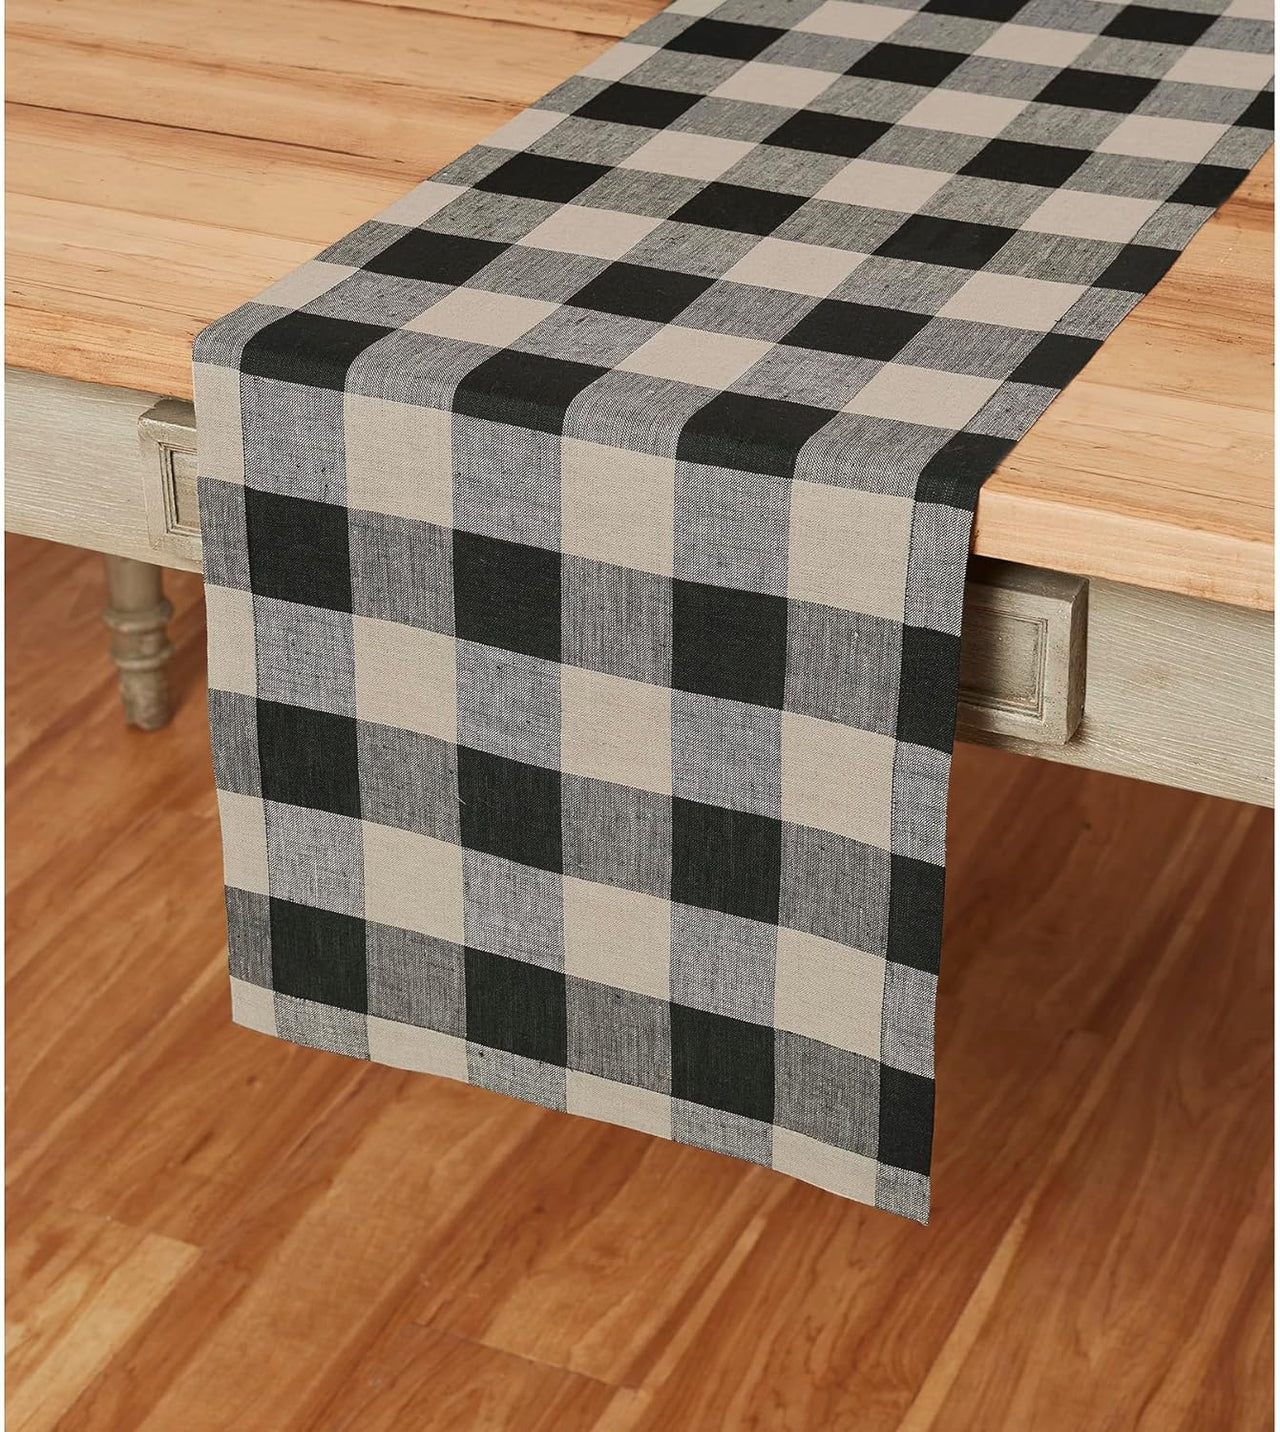 Wicklow Check Backed Table Runner 54"L - Black Park Designs